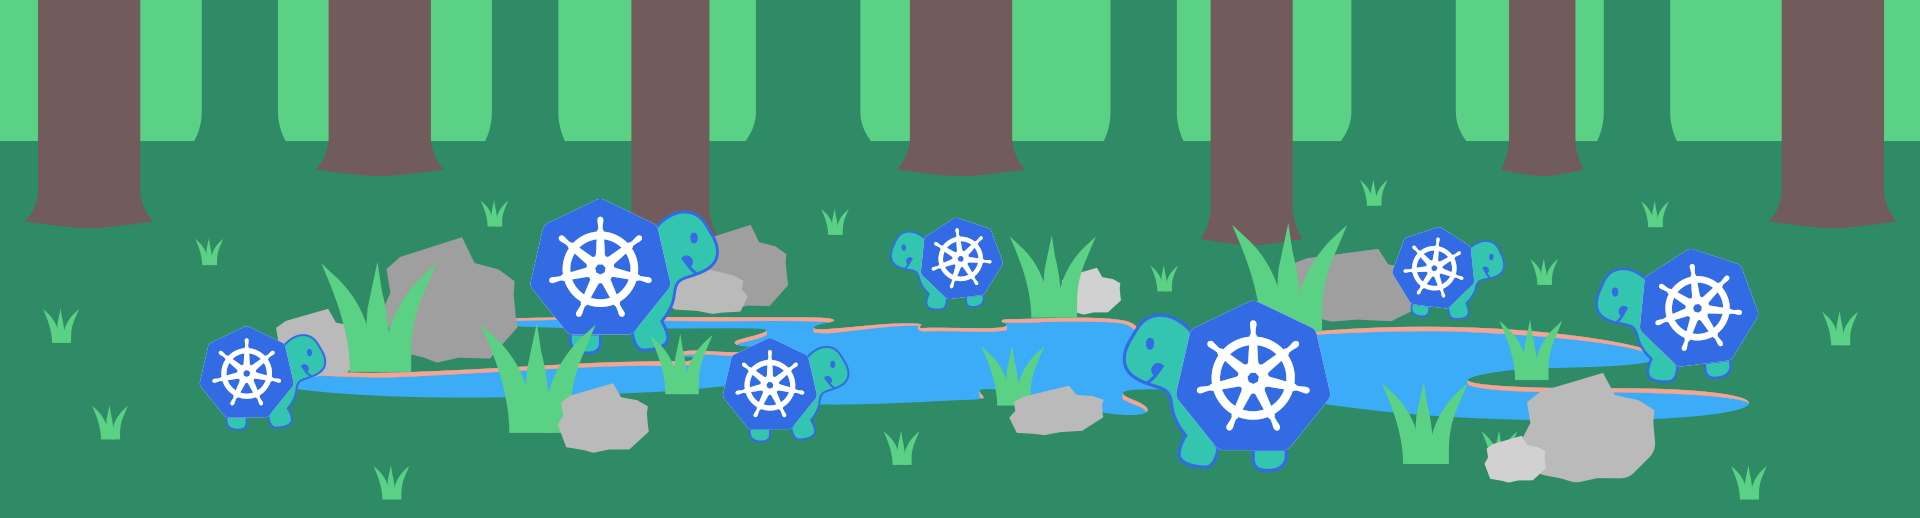 A series of stylised tortoises with Kubernetes logos for shells are walking around near a lake